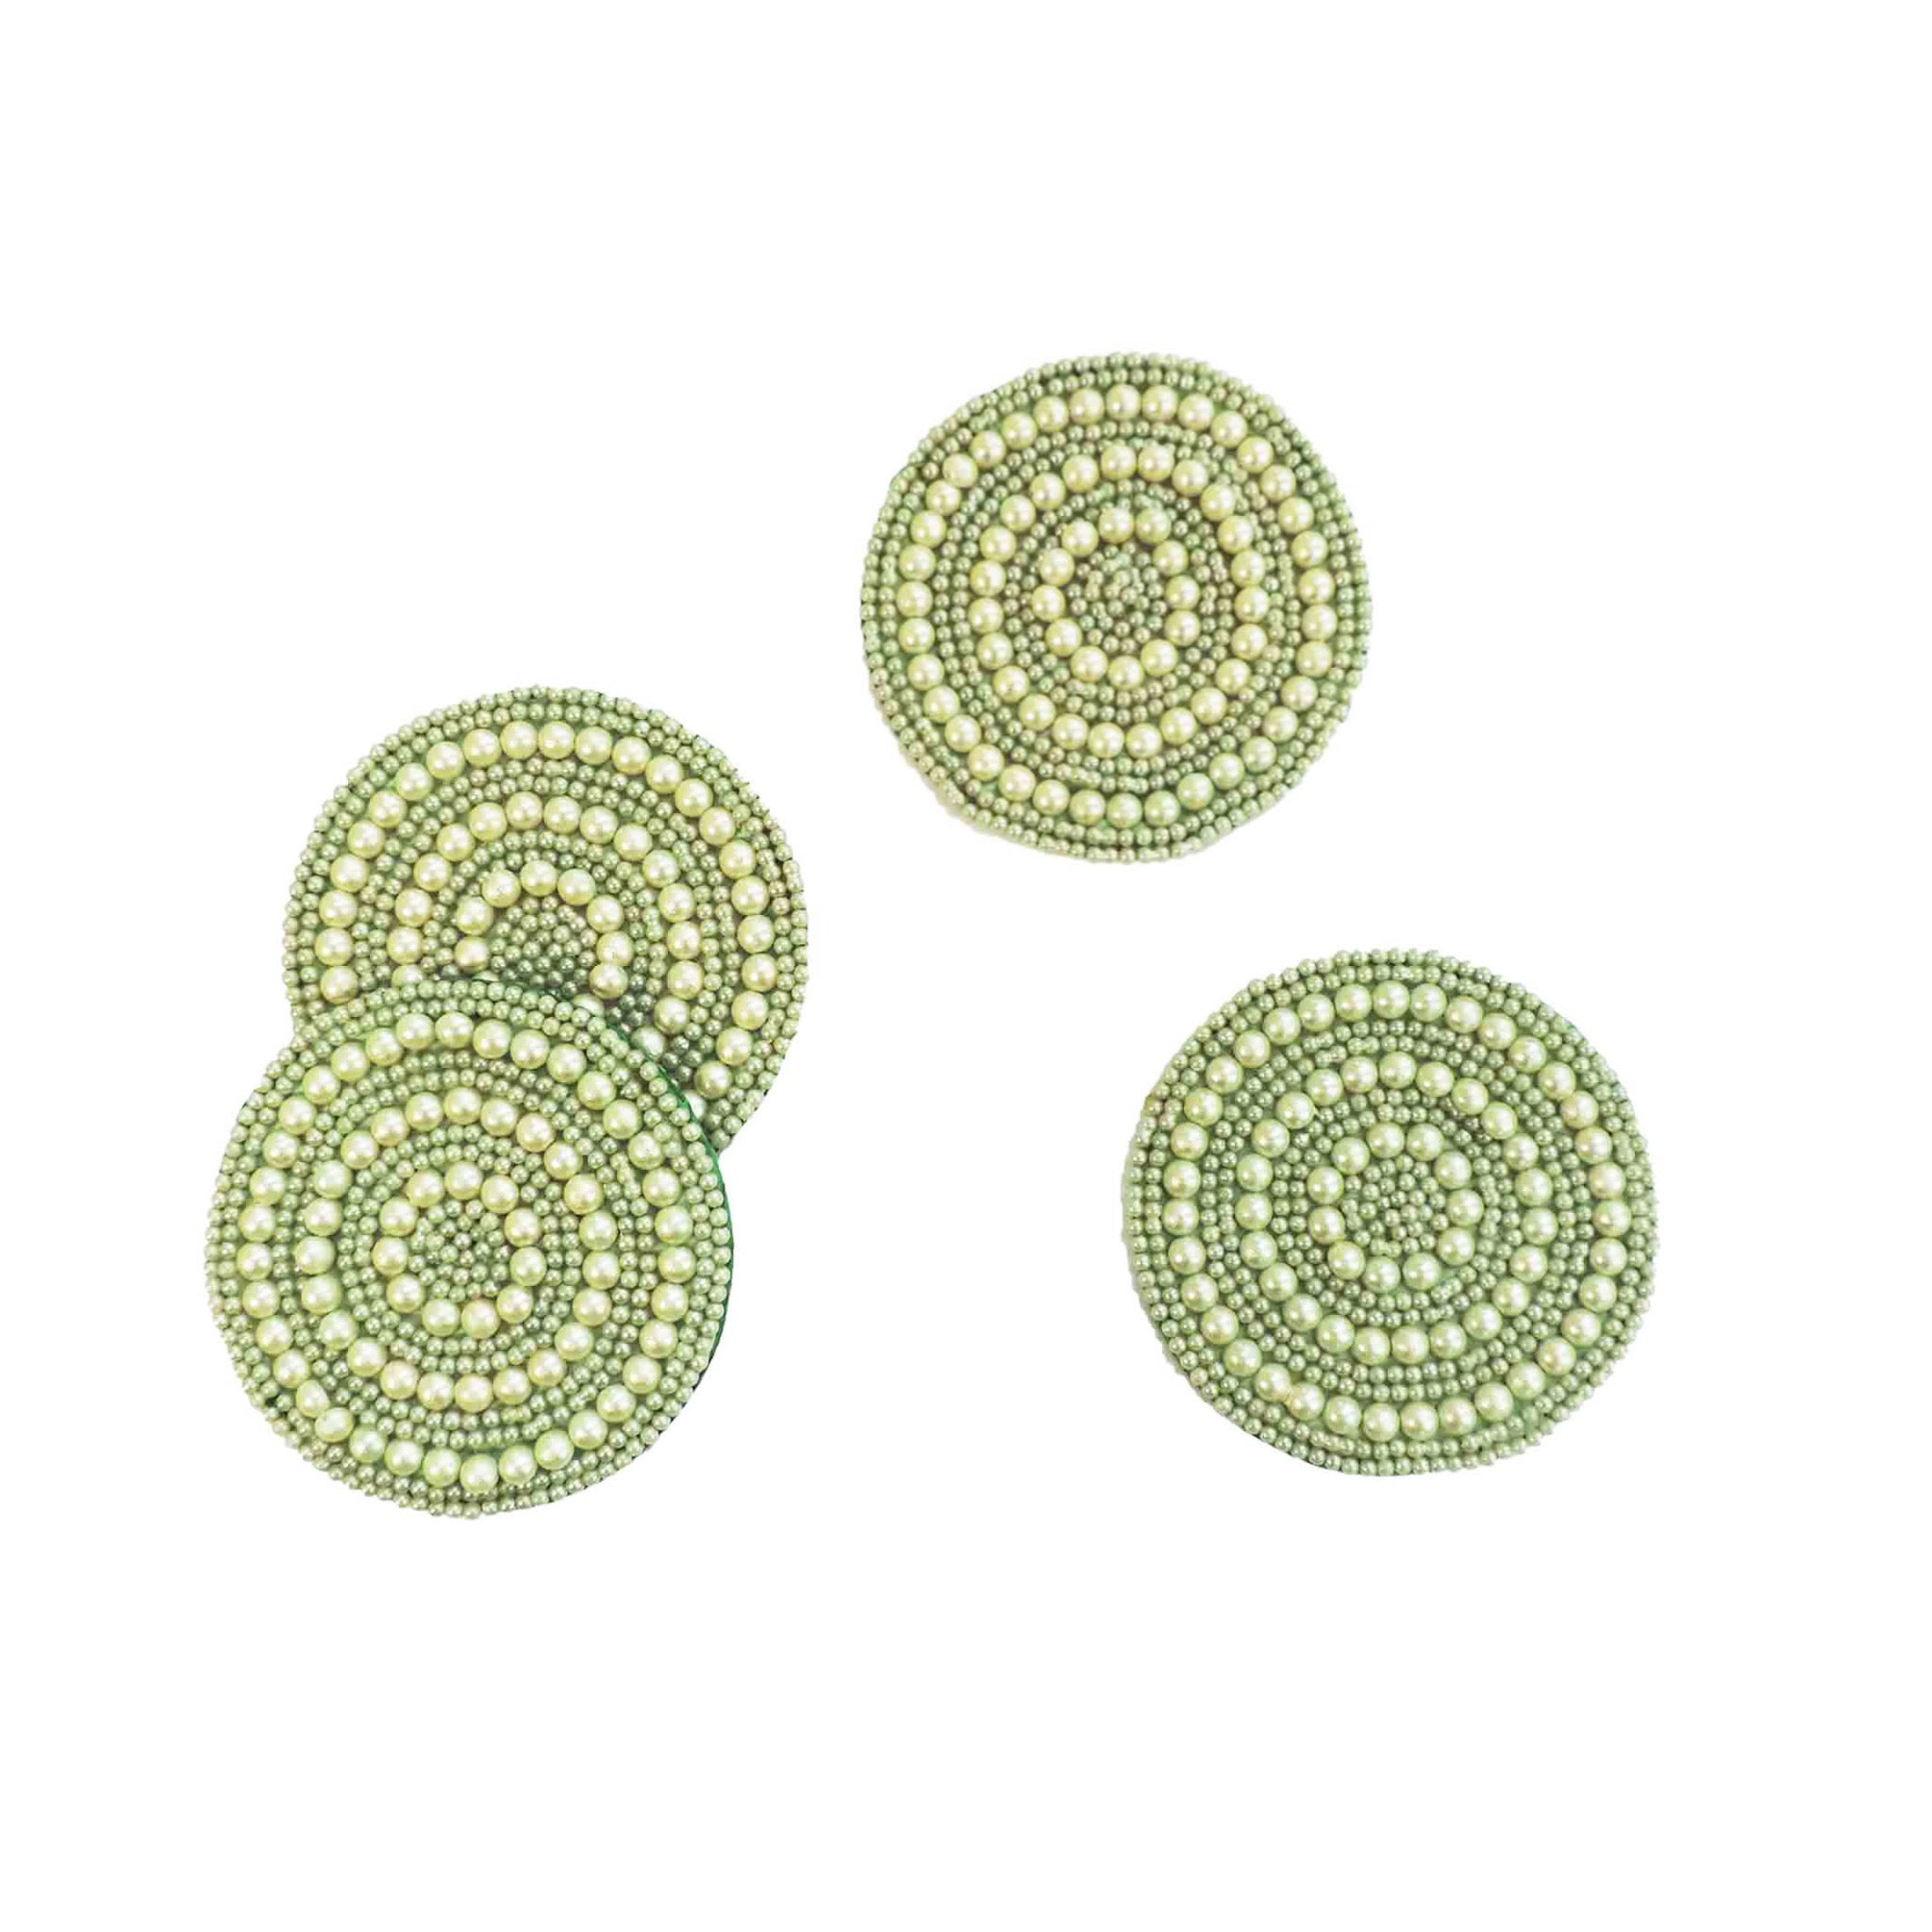 Full Circle Embroidered Coaster in Pale Green, Set of 4